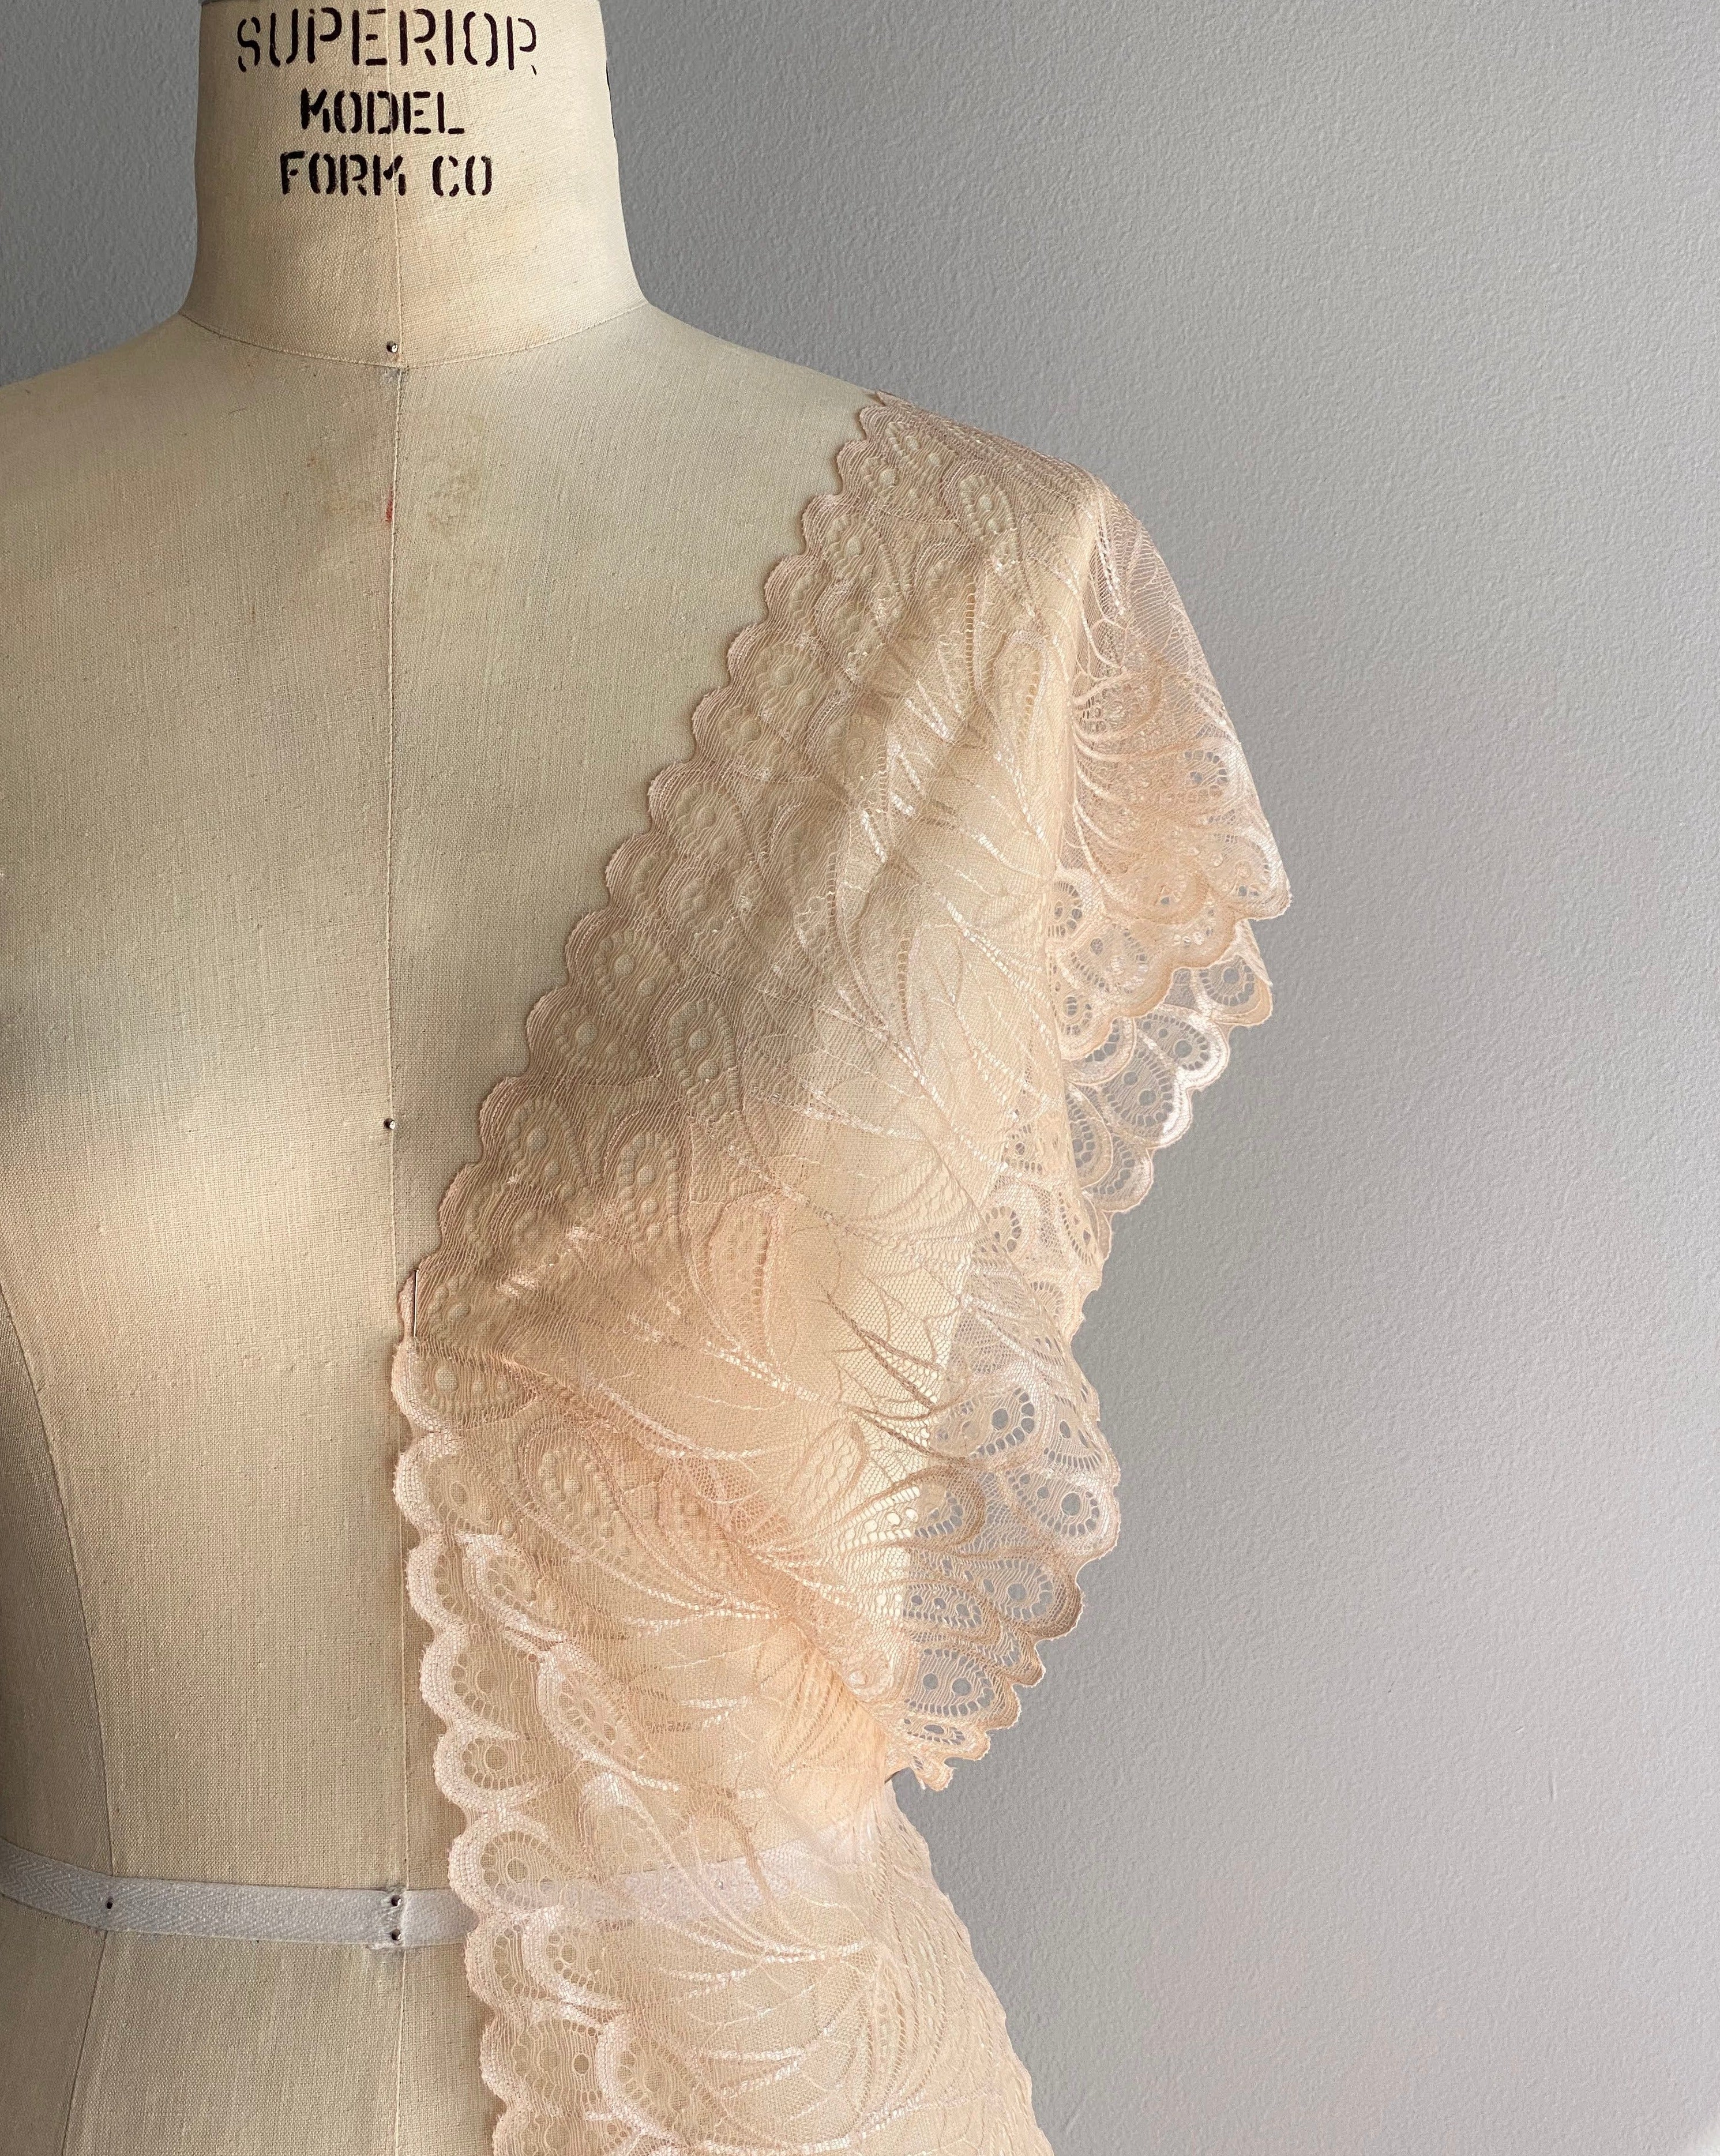 Rubies Custom Bras Soft Beige Peach Lace Sheer Bra Fabric that are used in our custom bras. We use only the softest bra materials that won't itch or cause allergies. Our fabrics are long lasting and high quality. Book a online fitting appointment to have a custom bra made today. A custom bra is worth the price because it is custom made to fit and made to last years.